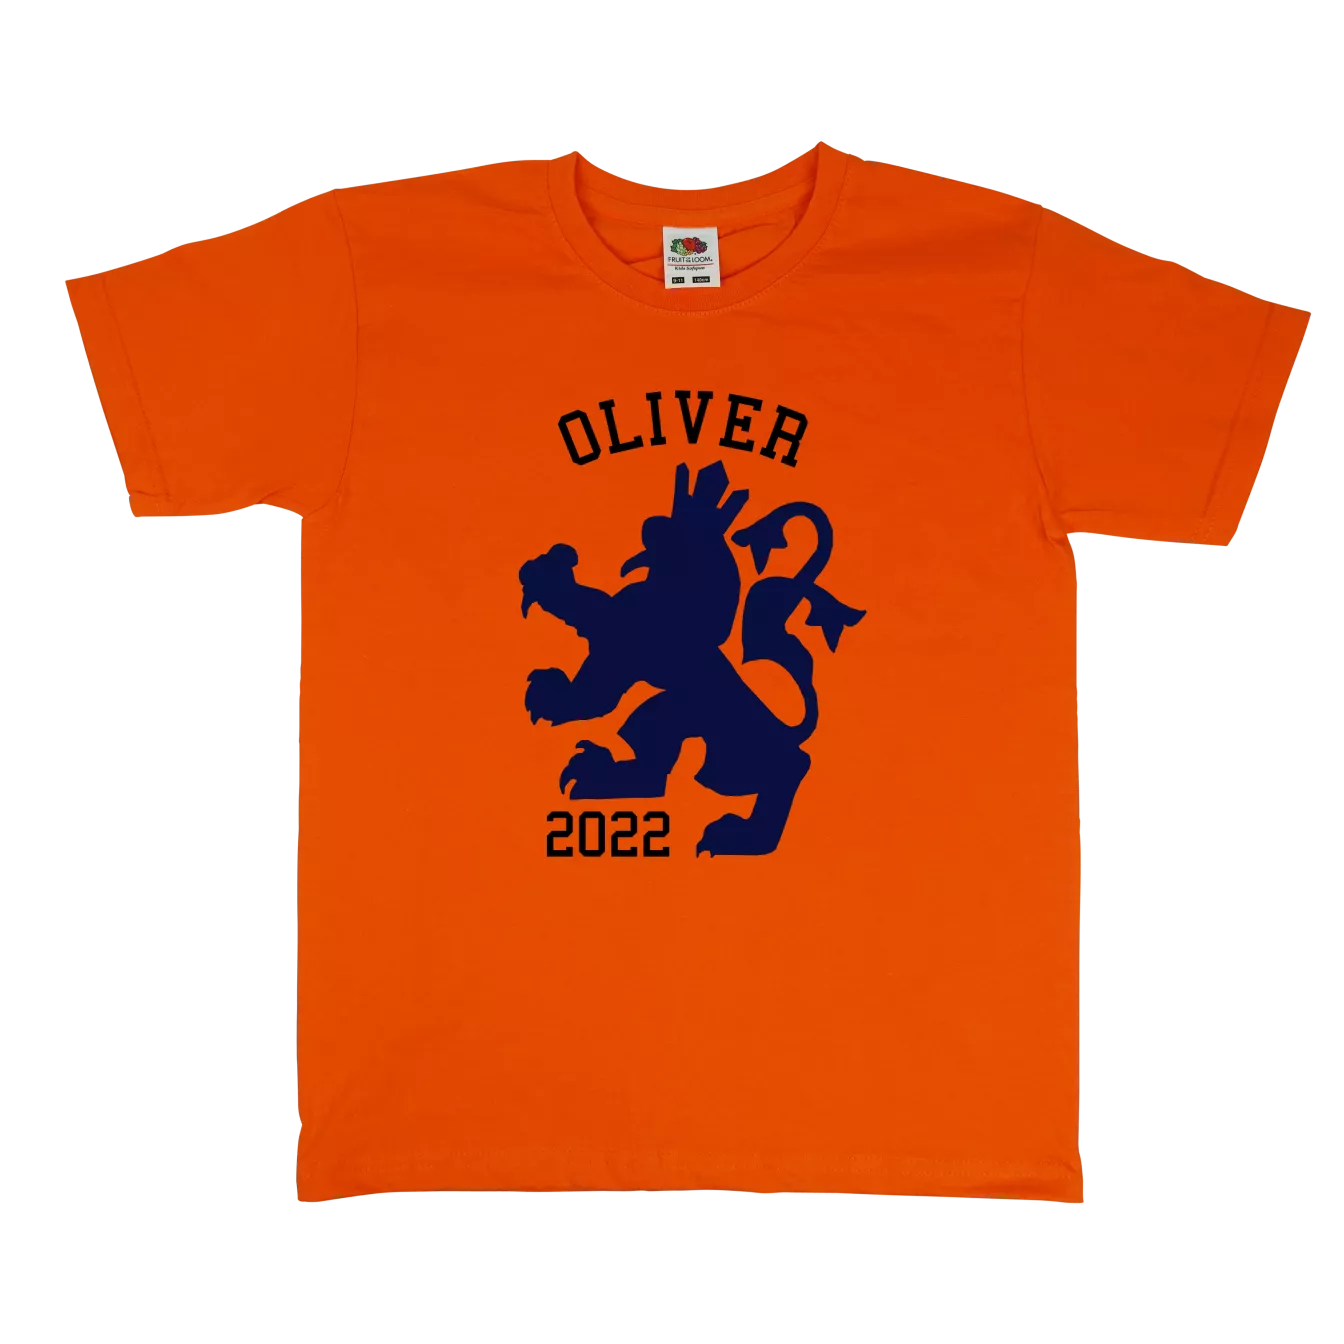 Orange shirt (kids) with name or text printed on it | Bulbby